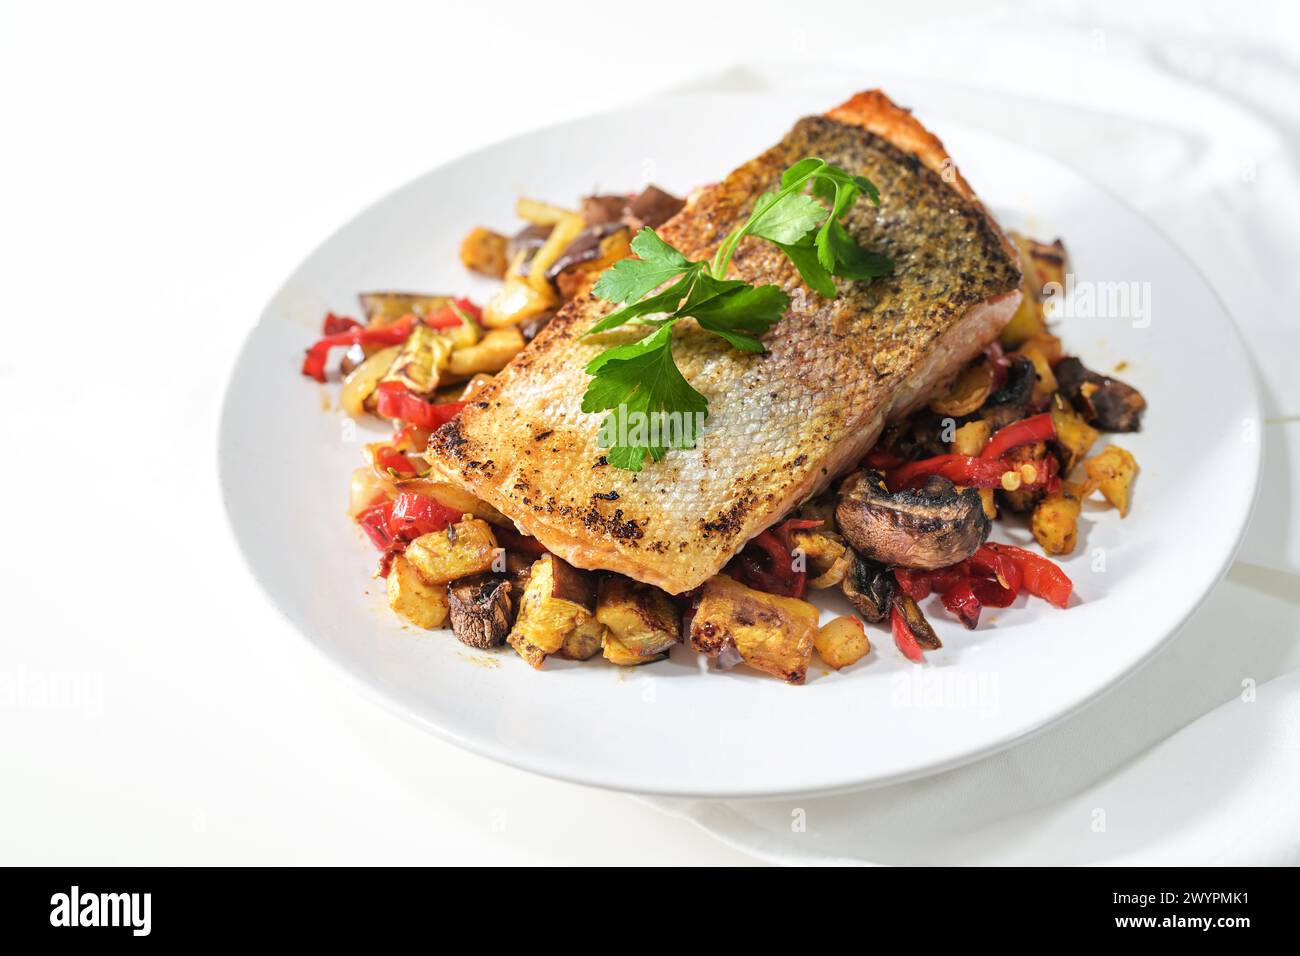 Rain trout fillet with a crispy fried skin on vegetables from the oven and parsley garnish served on a white plate, healthy fish dish suitable for low Stock Photo